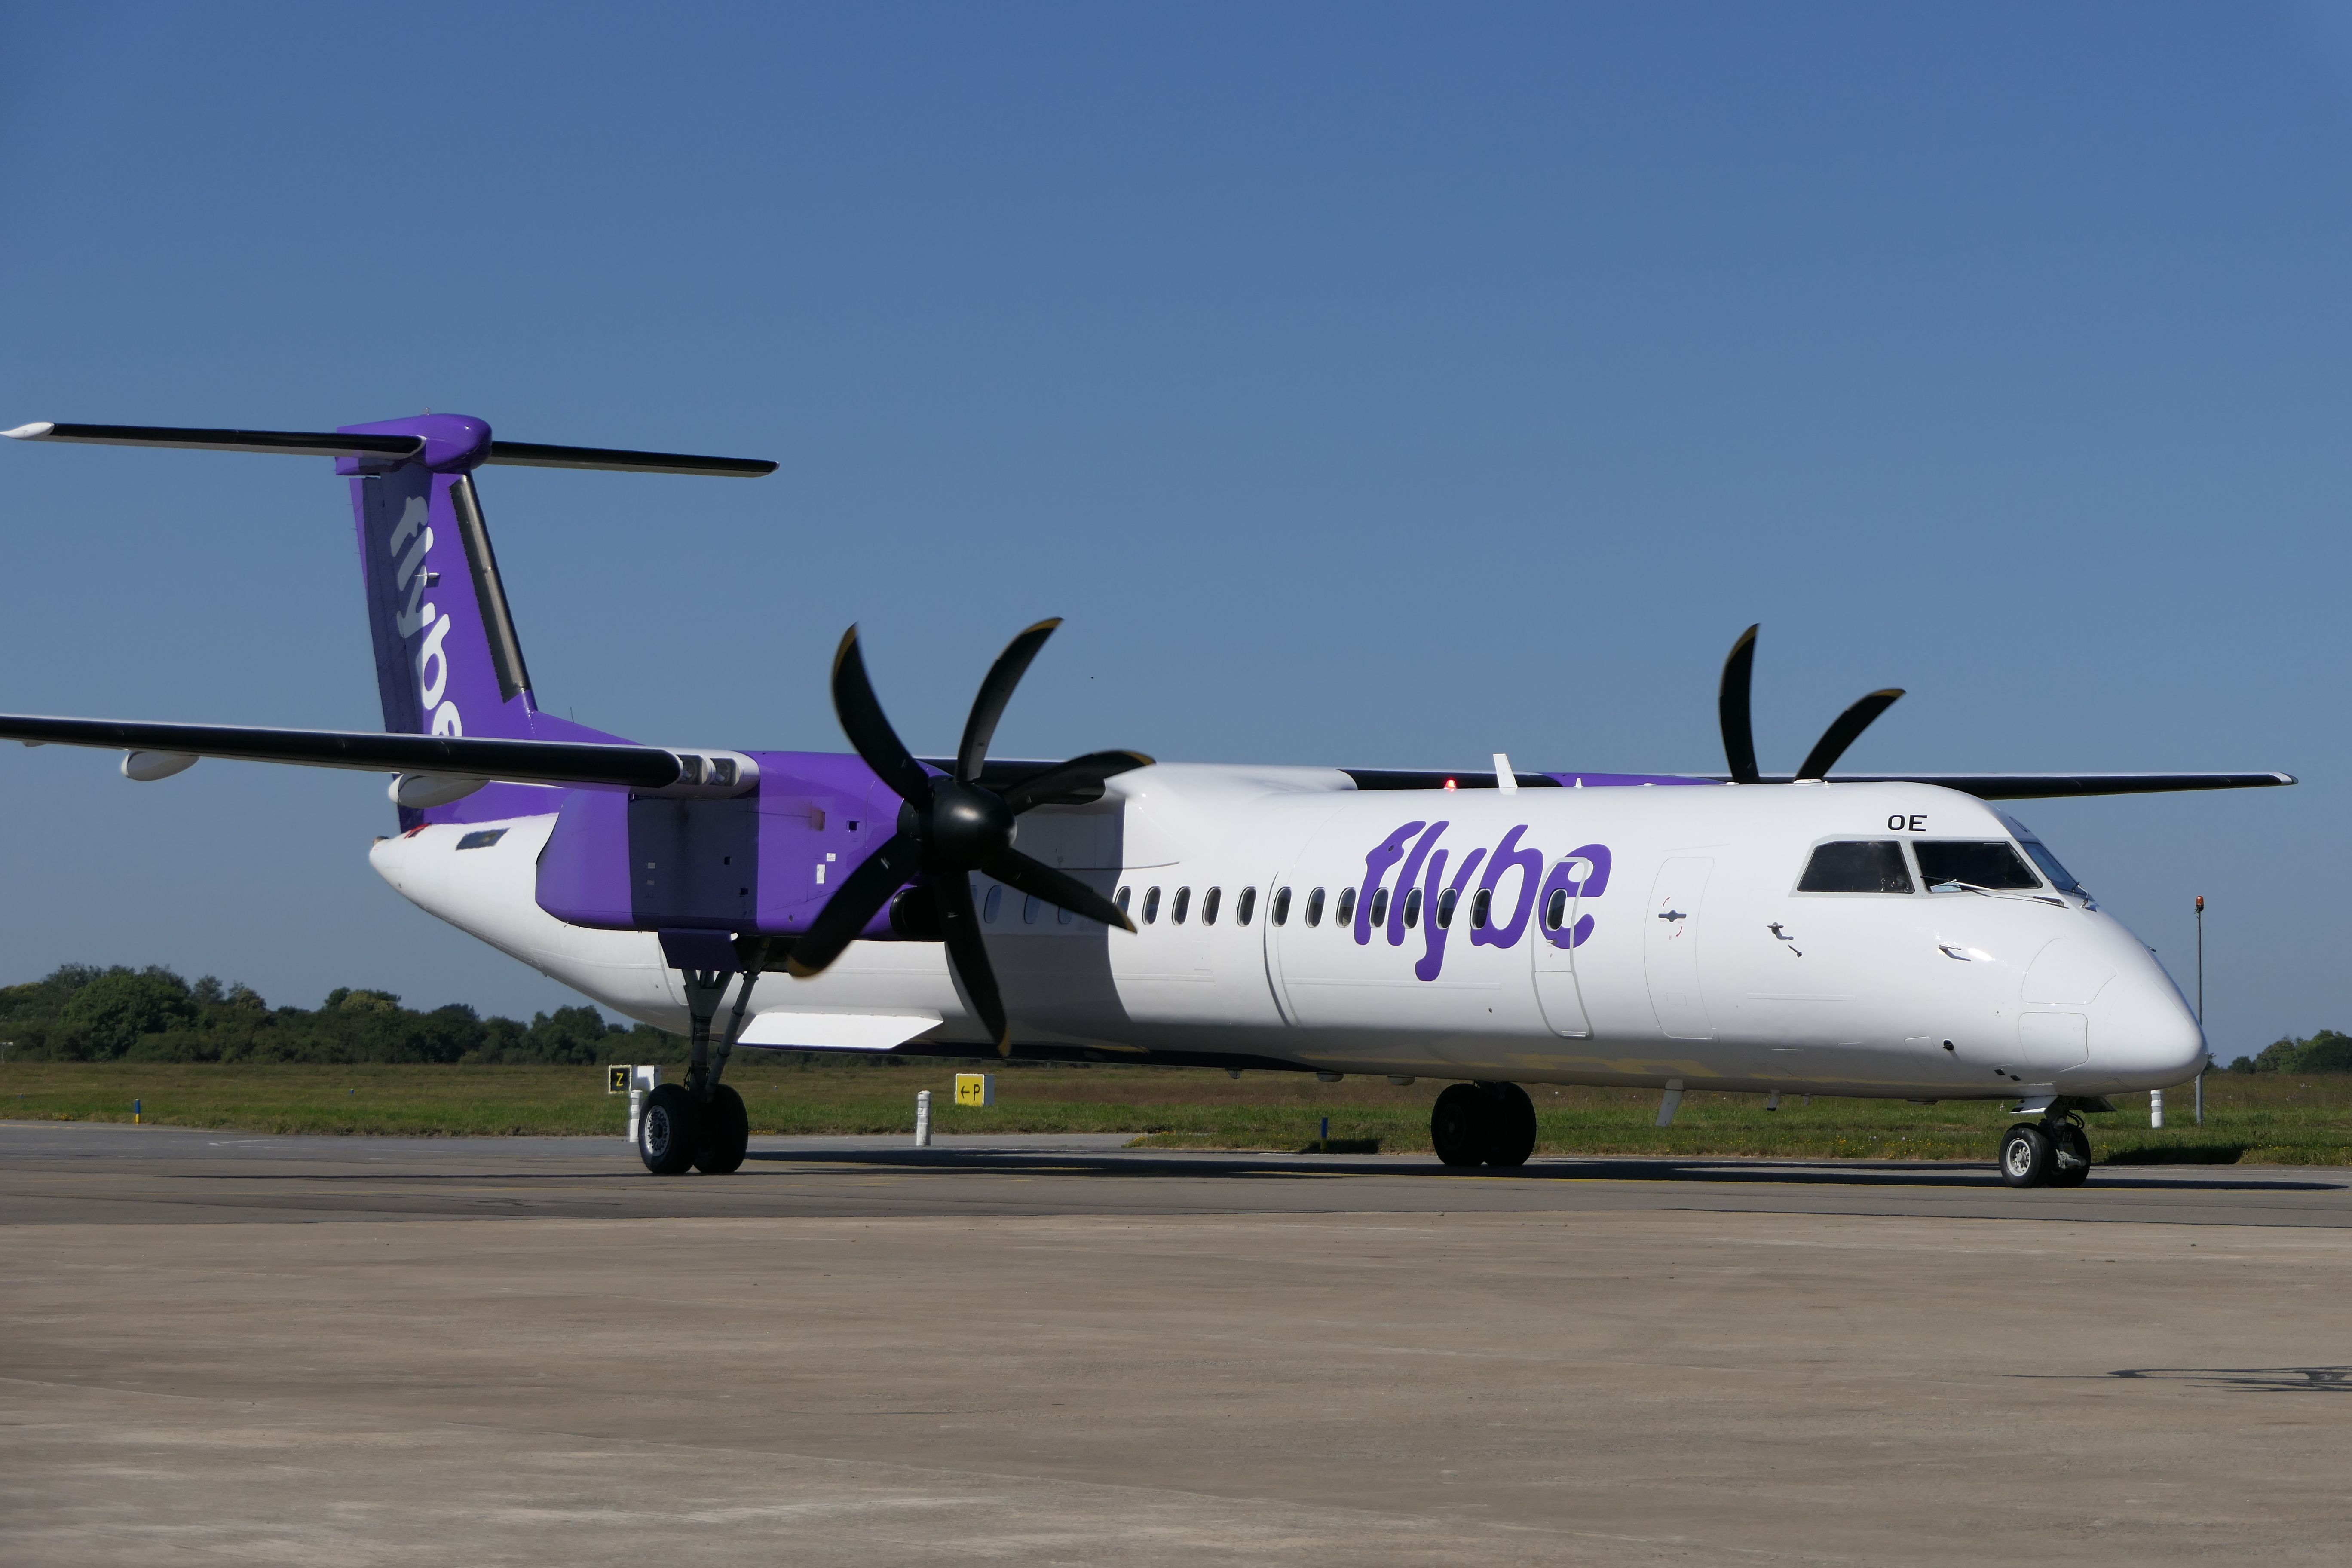 A new Flybe aircraft on the runway